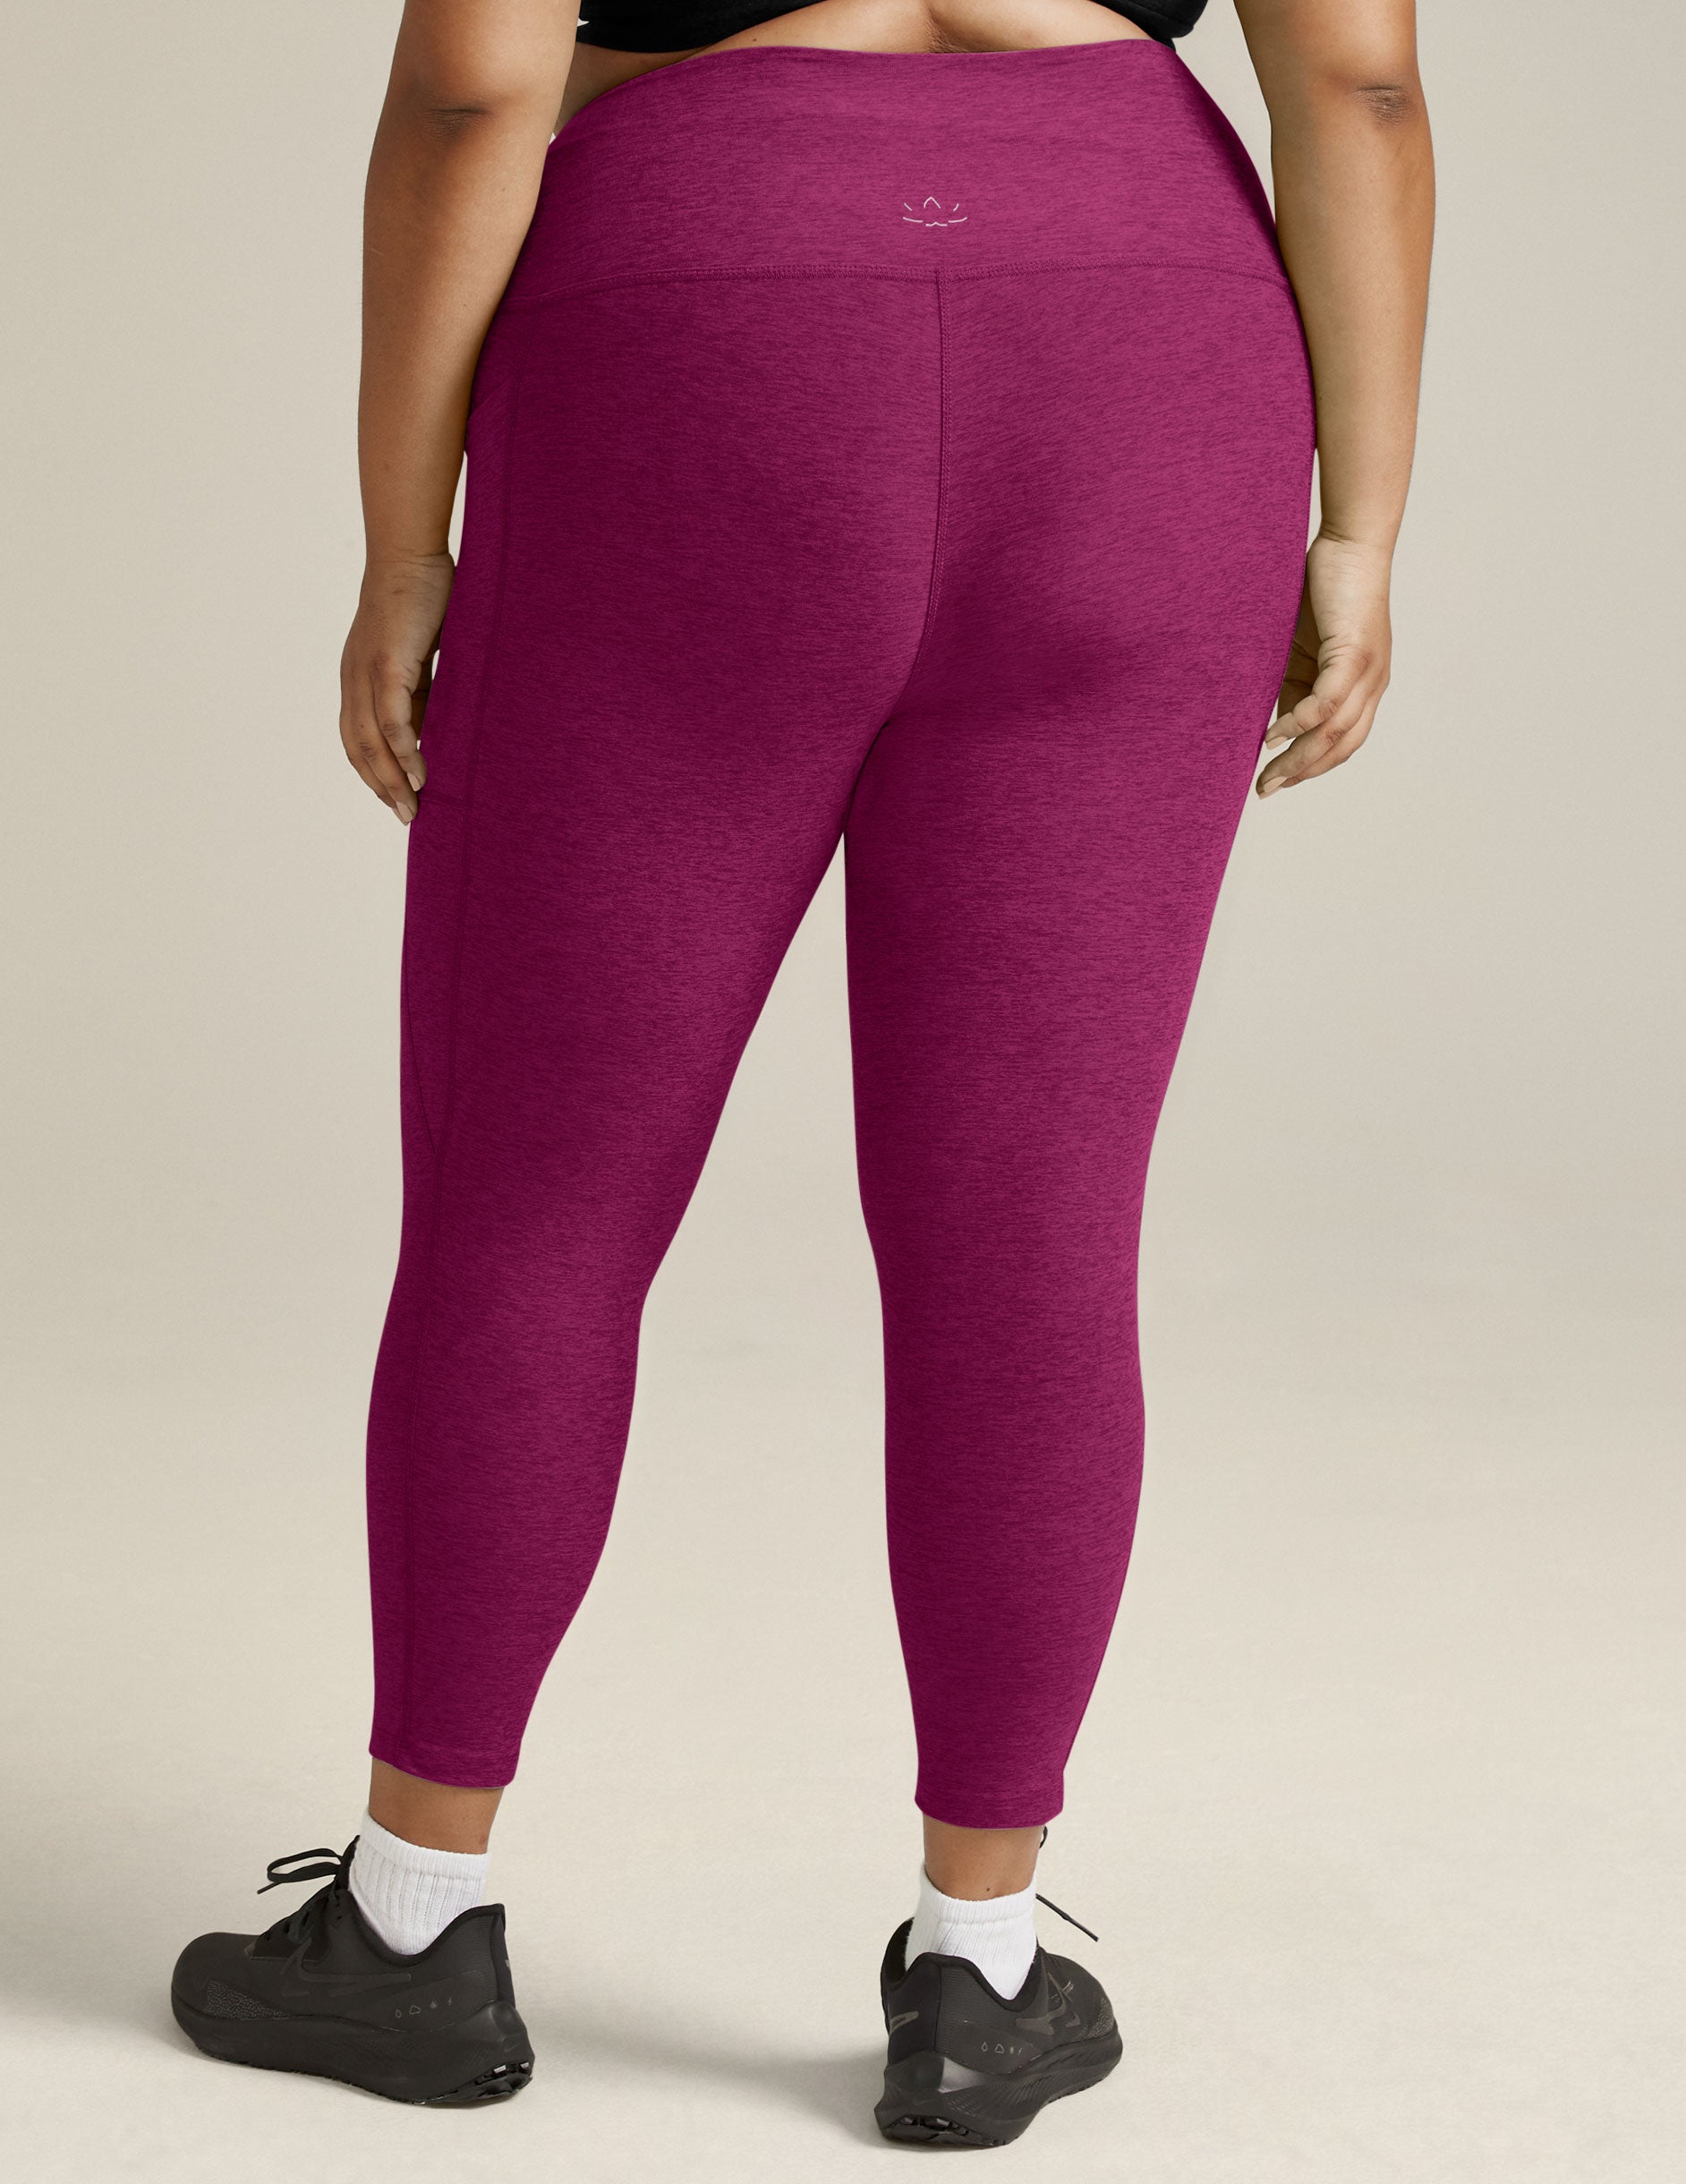 Buy High Rise Active Tights in Baby Pink with Side Pockets Online